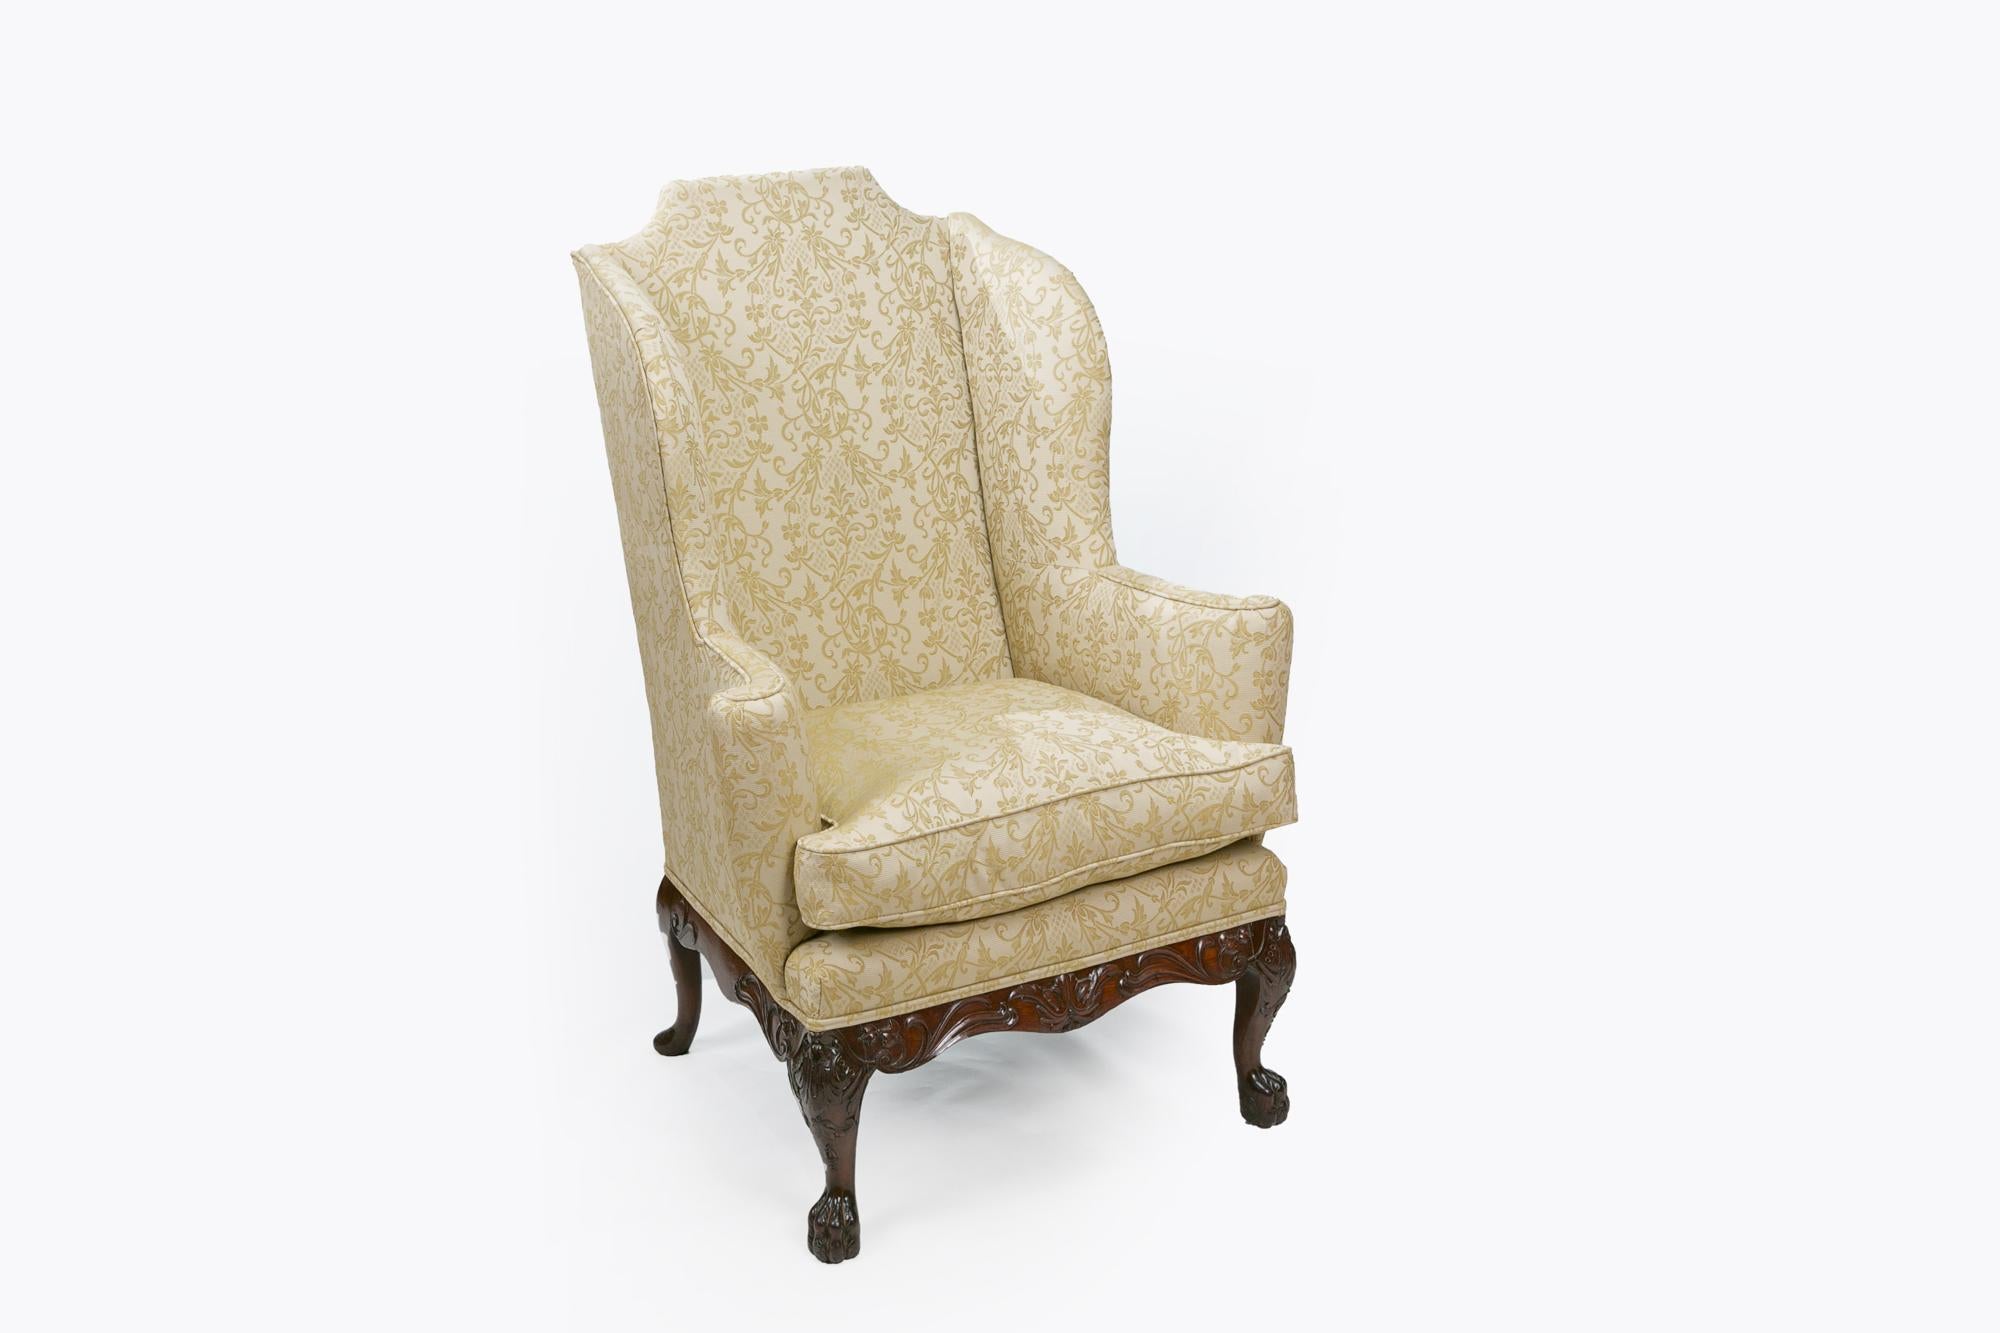 18th Century George III Wing Chair In Excellent Condition For Sale In Dublin 8, IE